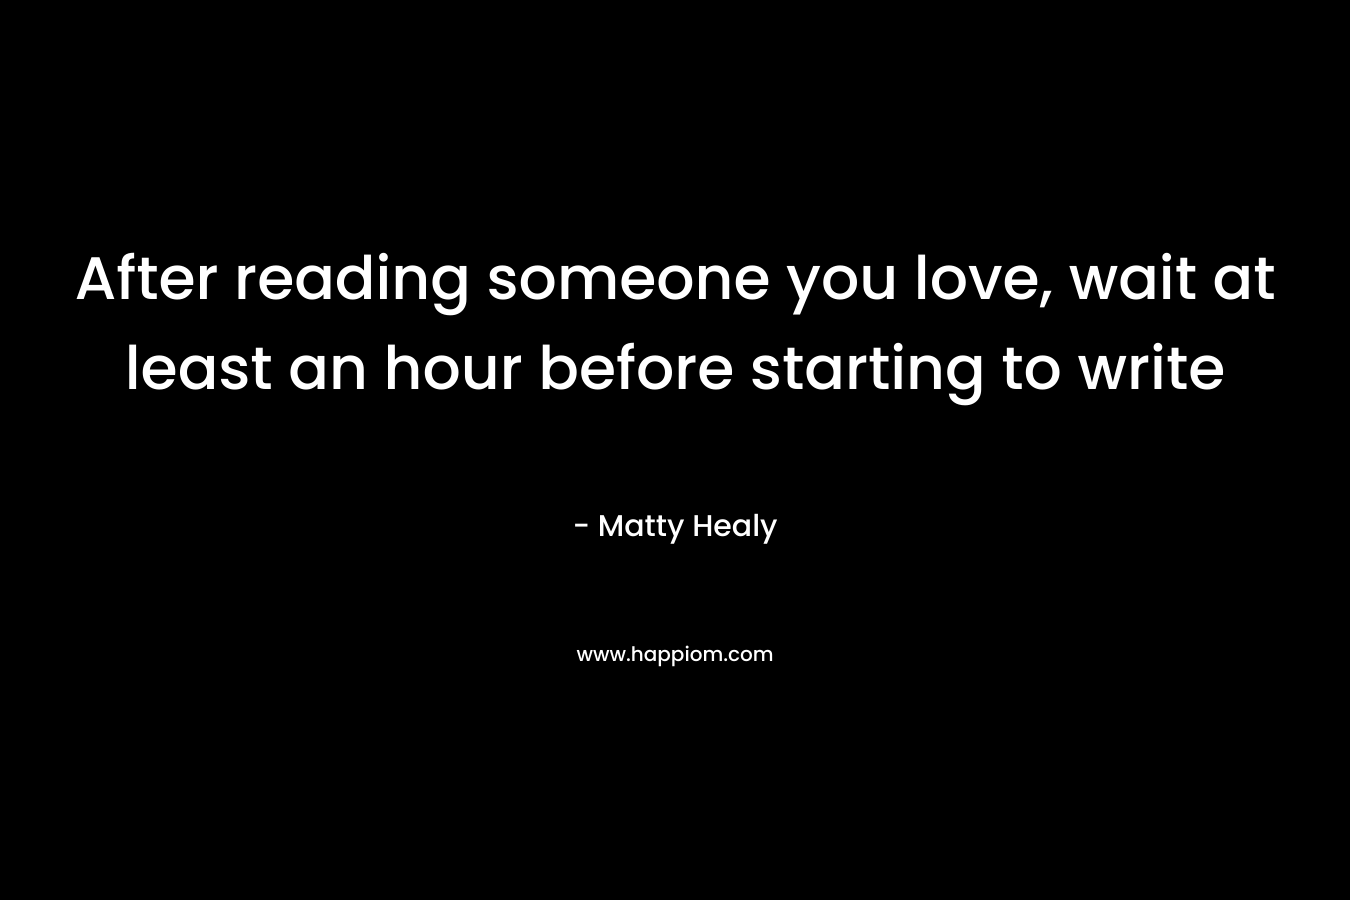 After reading someone you love, wait at least an hour before starting to write